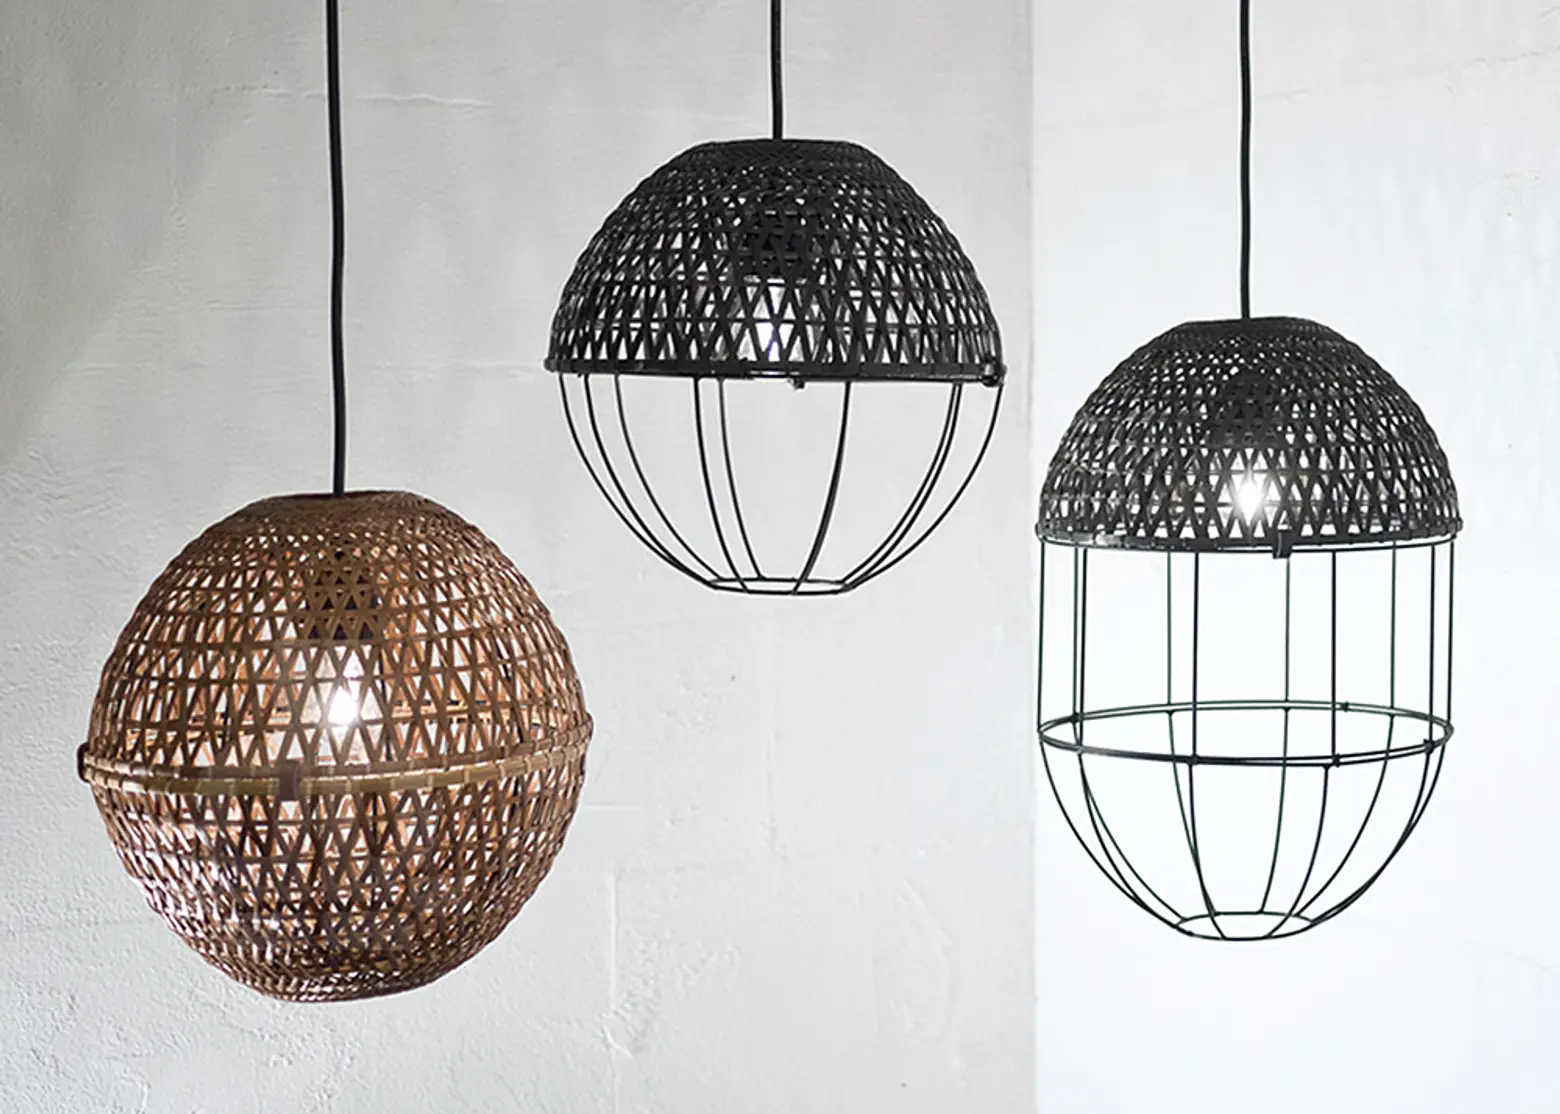 POP: Scandi-Thai Bamboo Lights by Ljung & Ljung Are a Sophisticated Take on Paper Lanterns